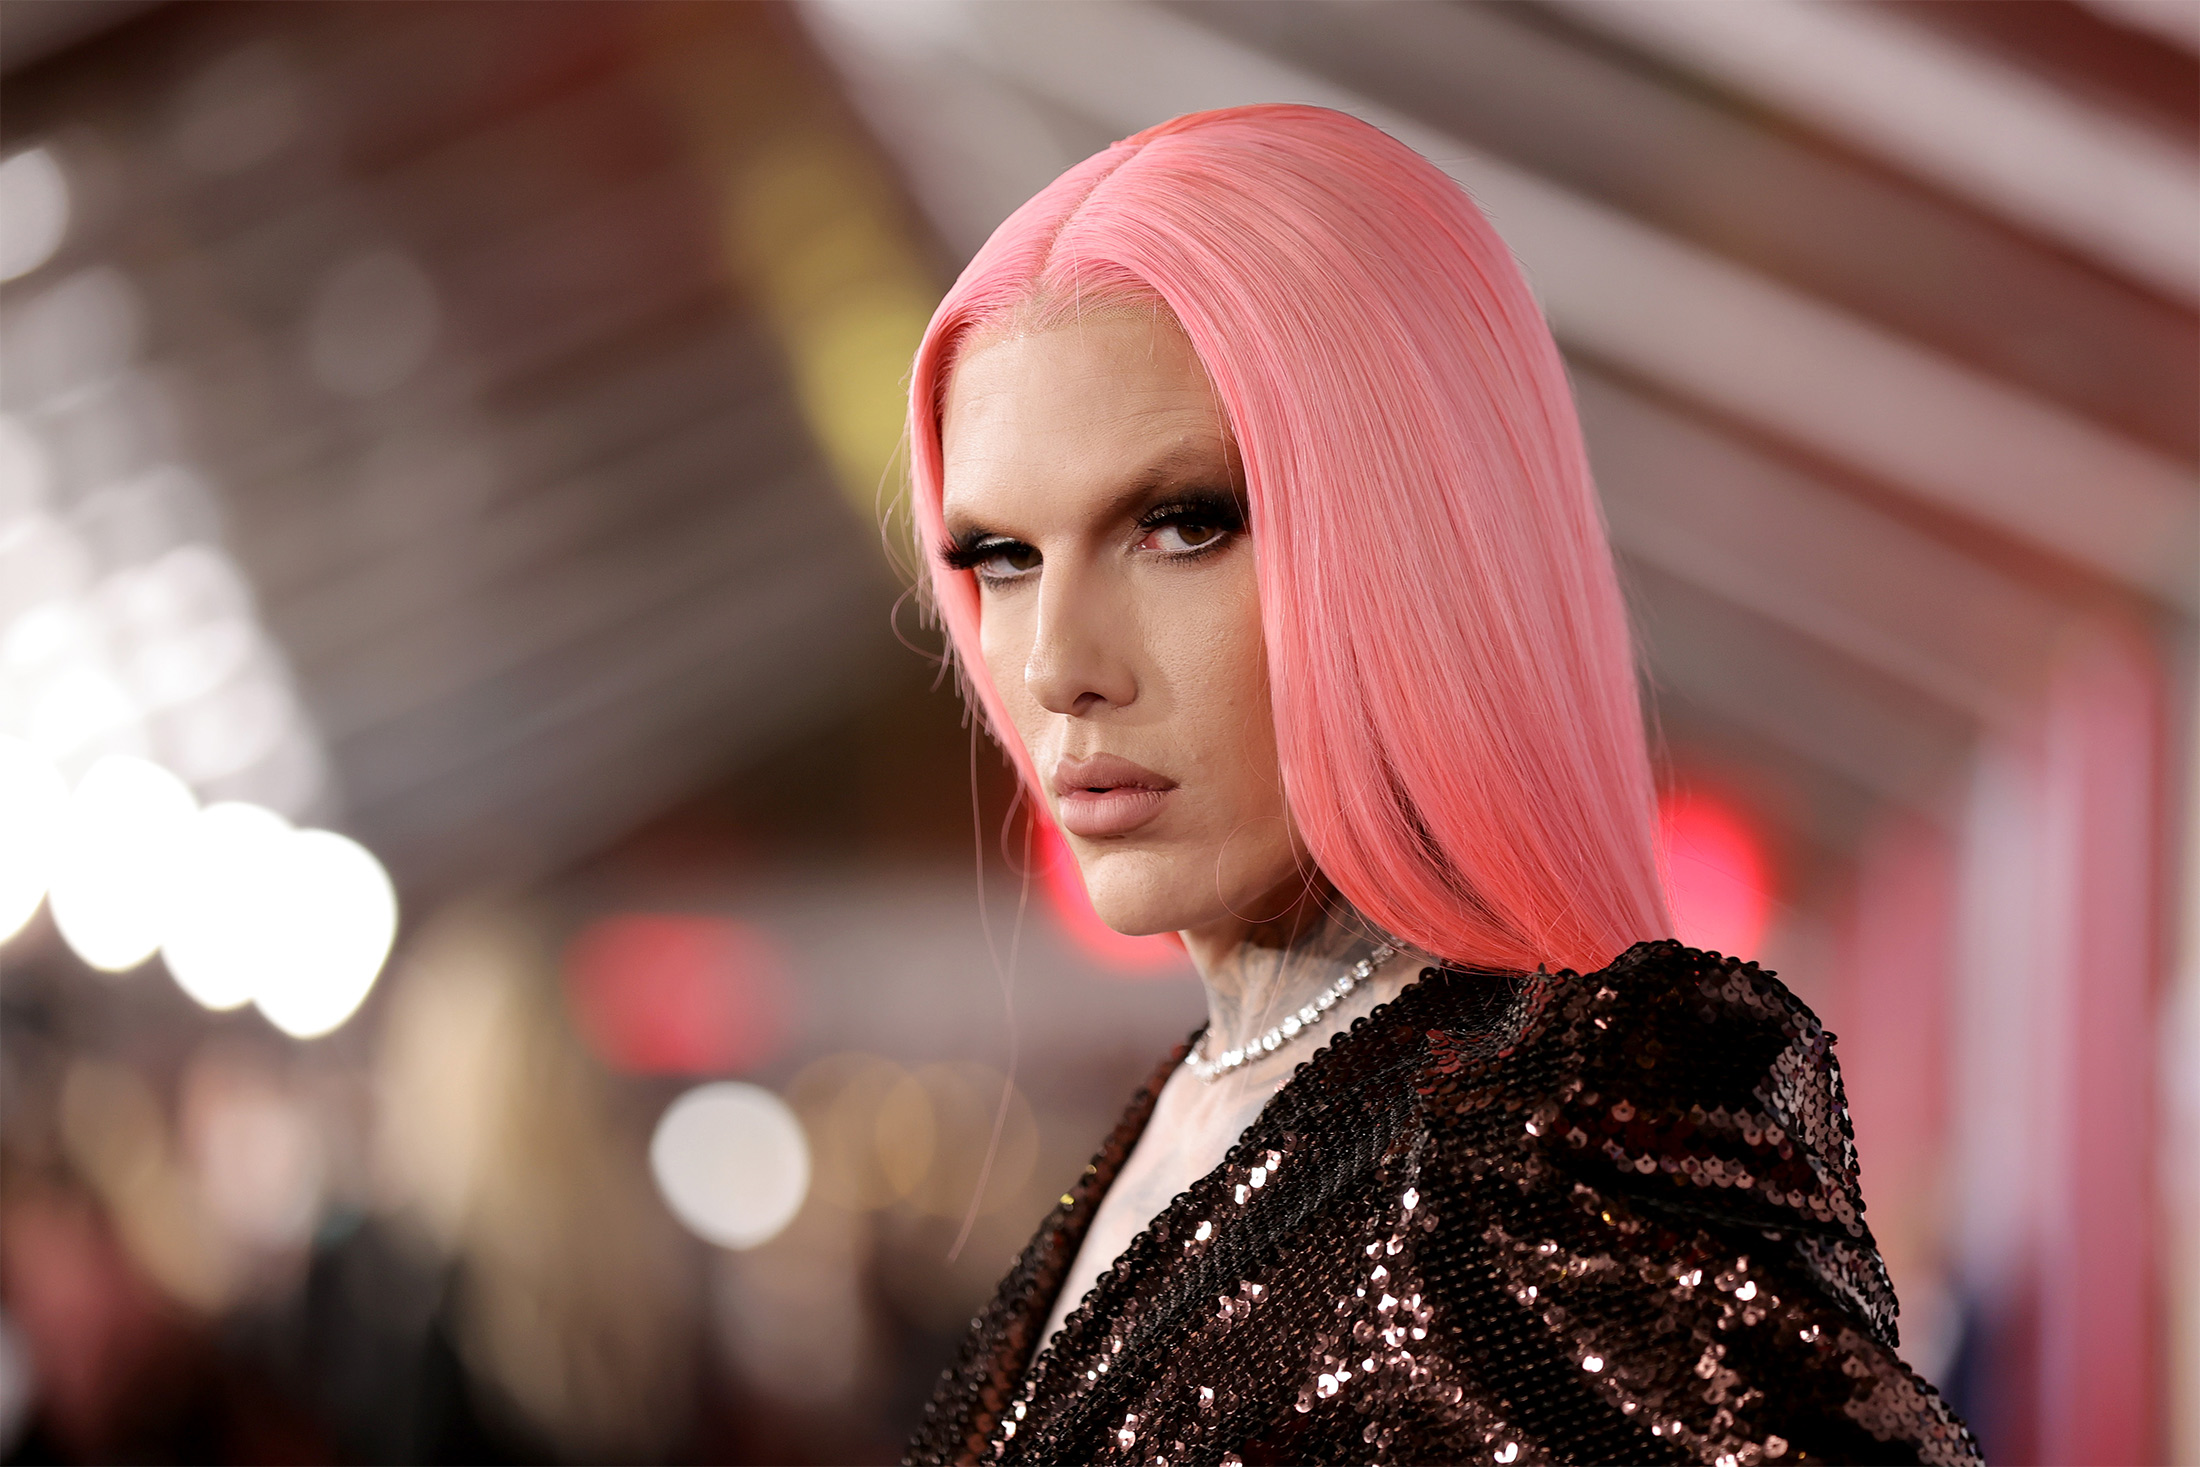 A timeline of every messed up thing Jeffree Star has done to date